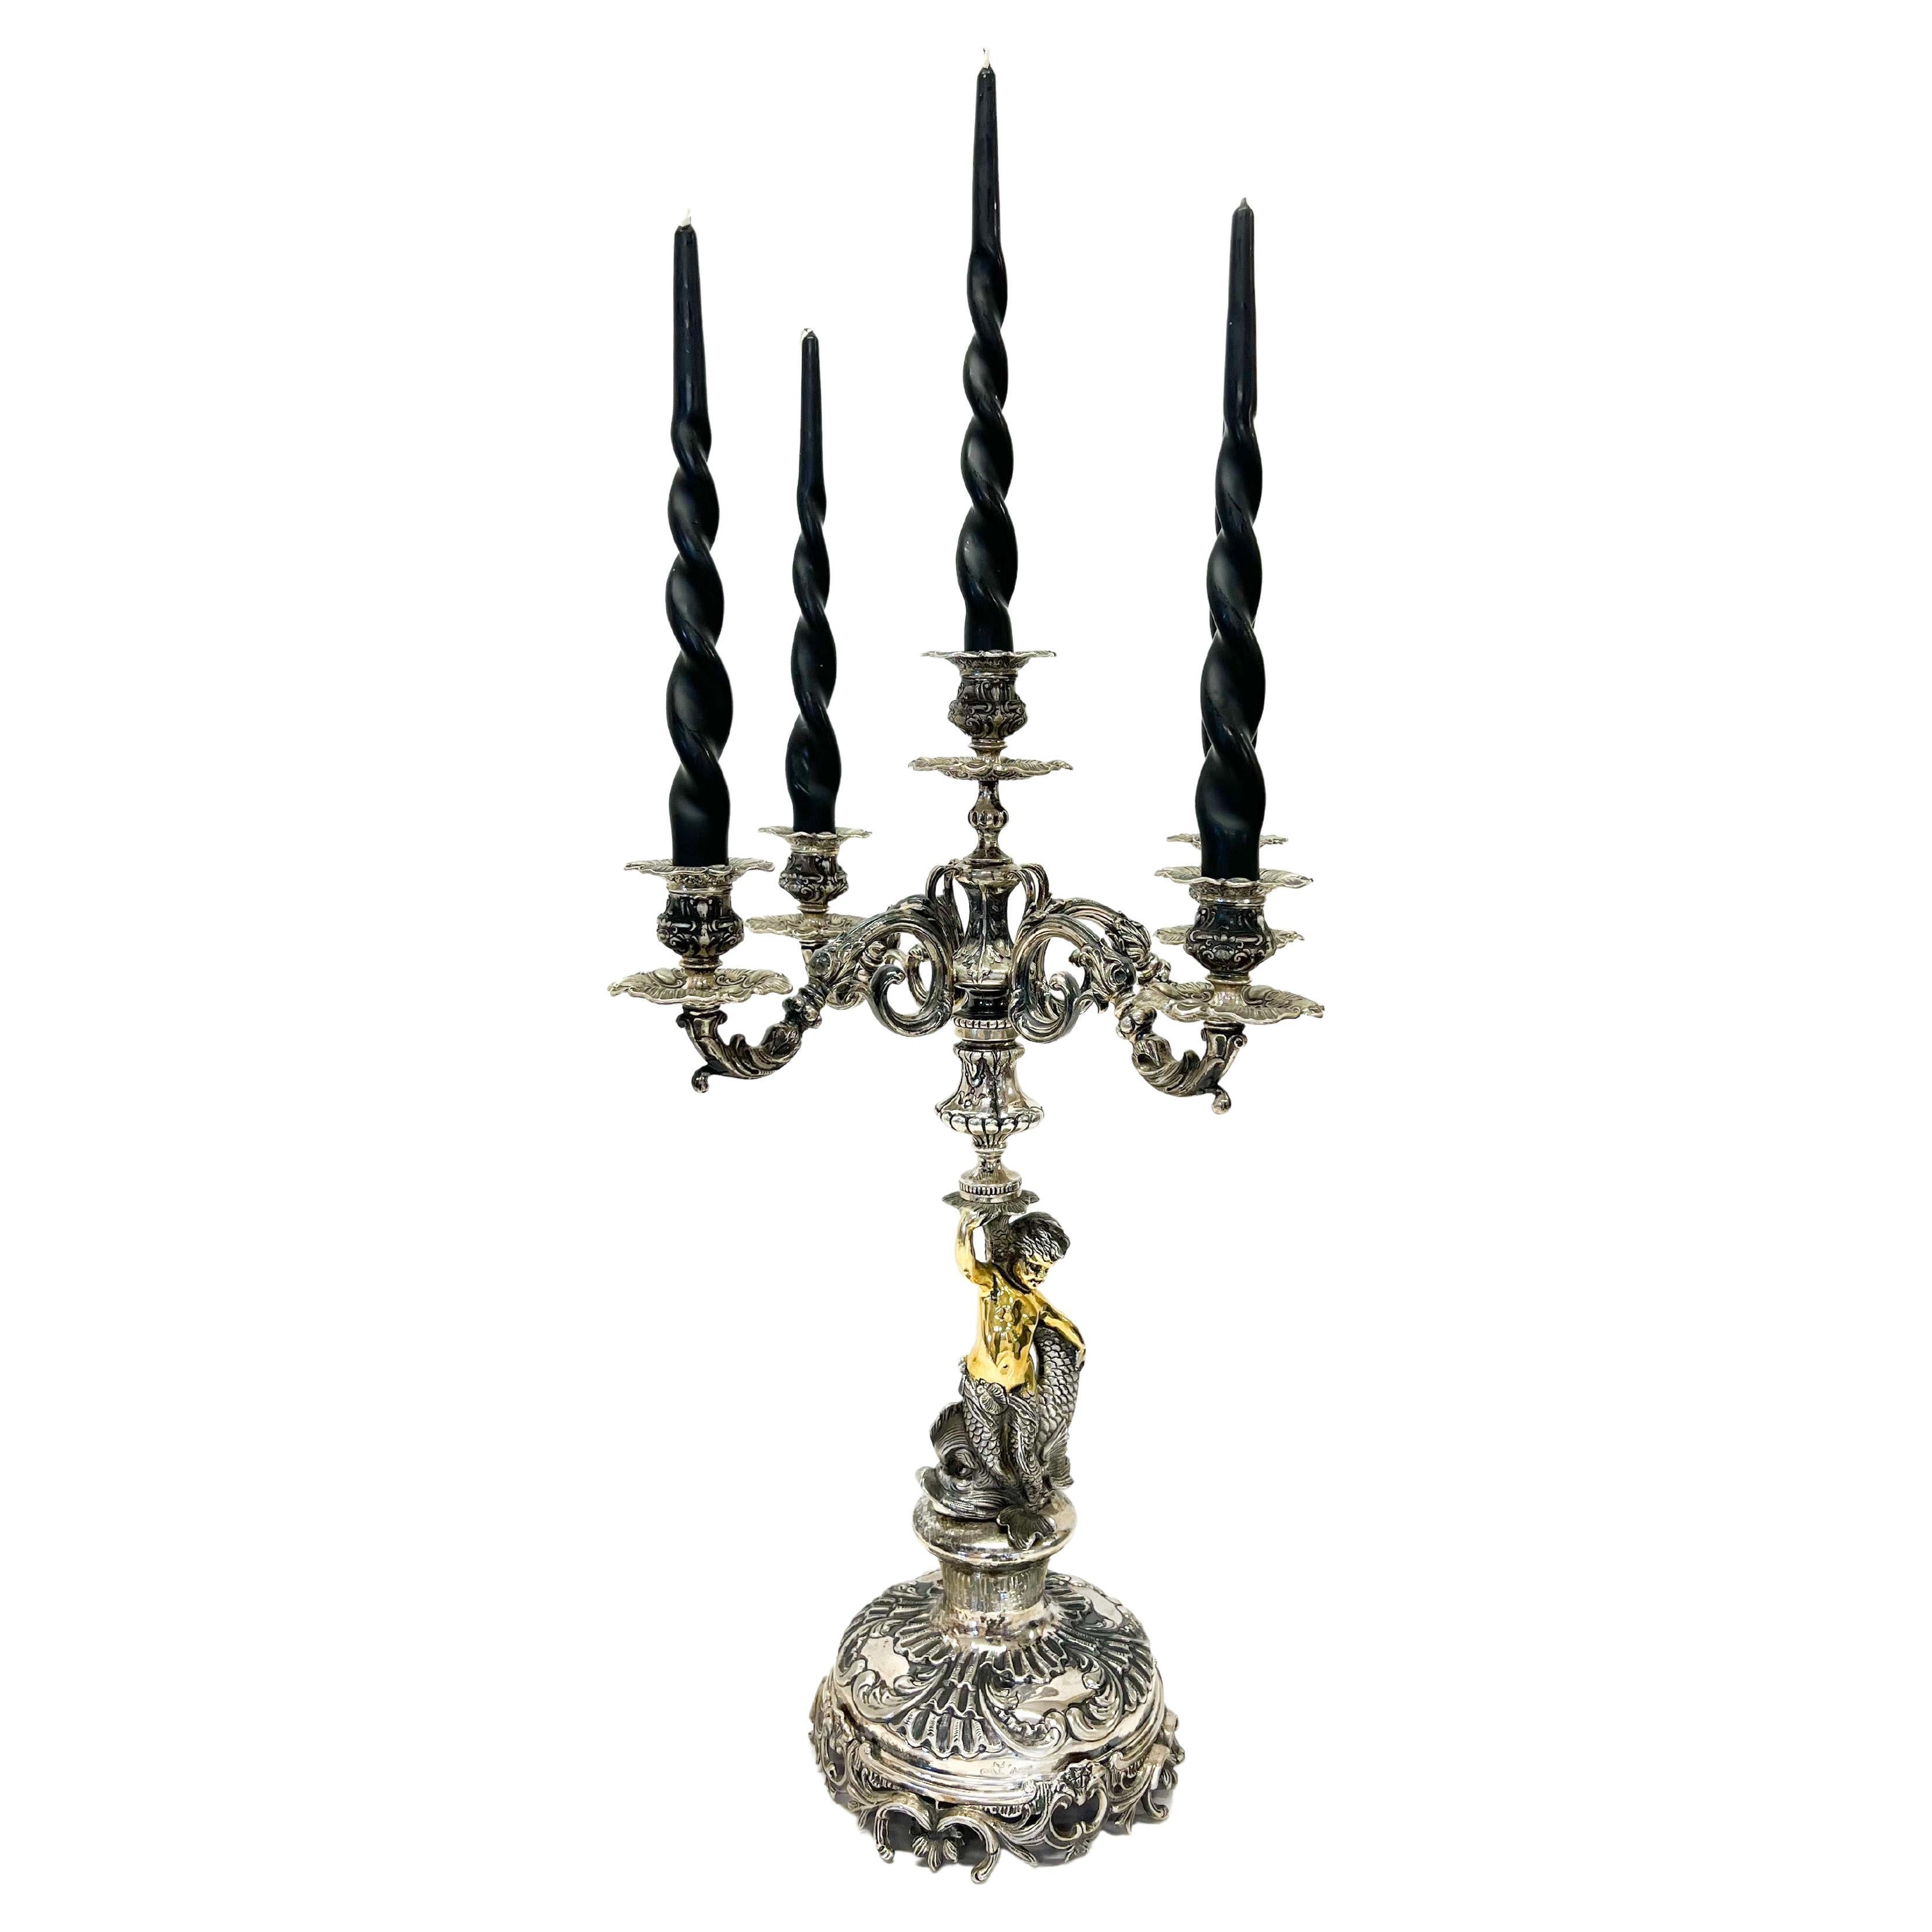 Gorgeous a Five-Branched Candelabrum Silver For Sale